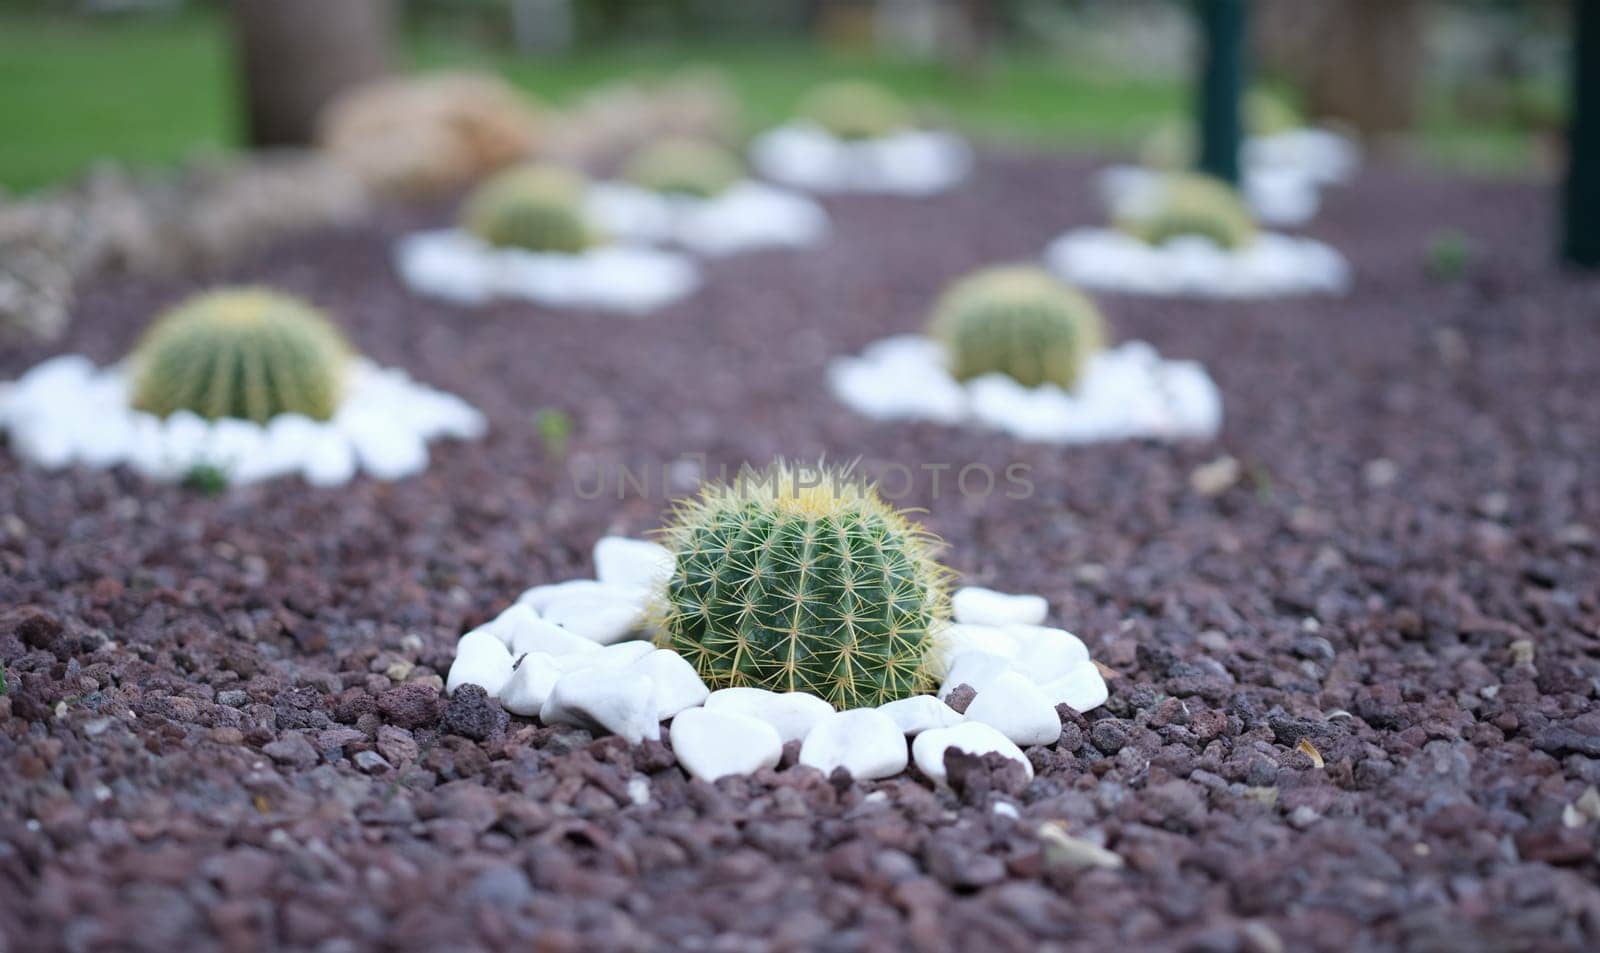 Flowerbed of cactus flowers in the garden with purple and white stones. Beautiful cactus plantation in summer garden concept